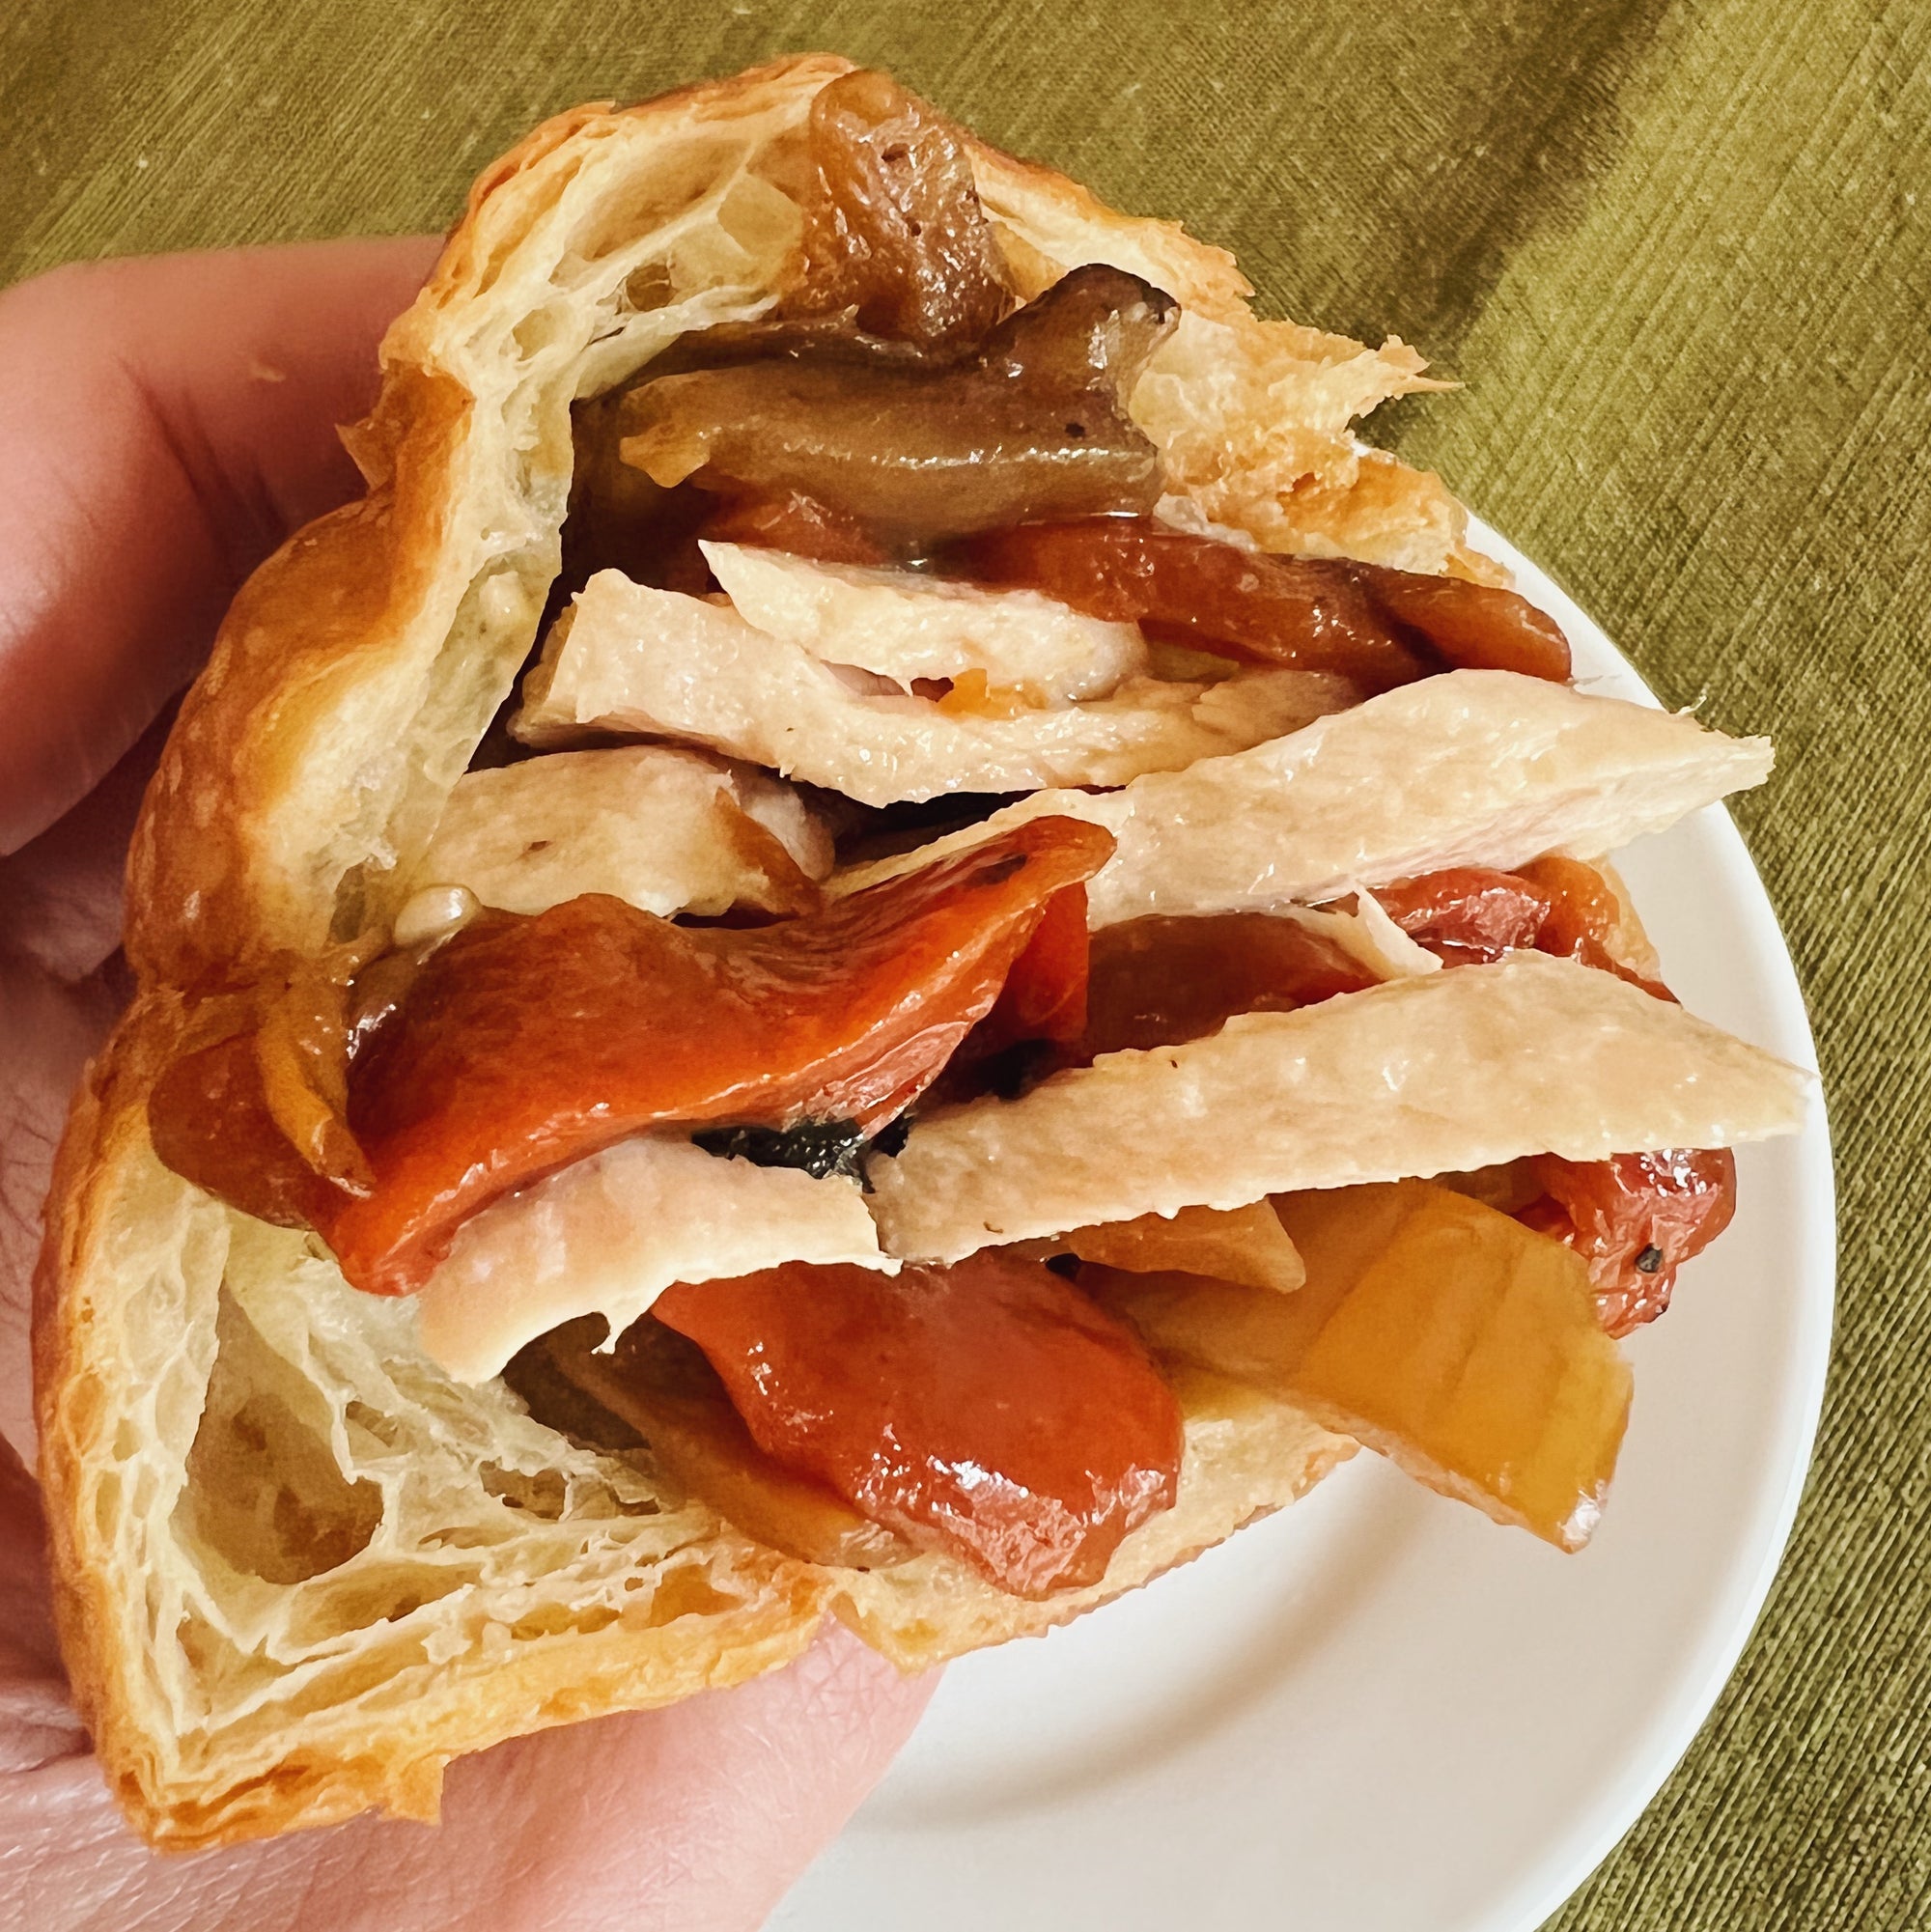 Ventresca de Bonito del Norte, white tuna belly fillets with fire-roasted peppers and onions stuffed into a buttery croissant.